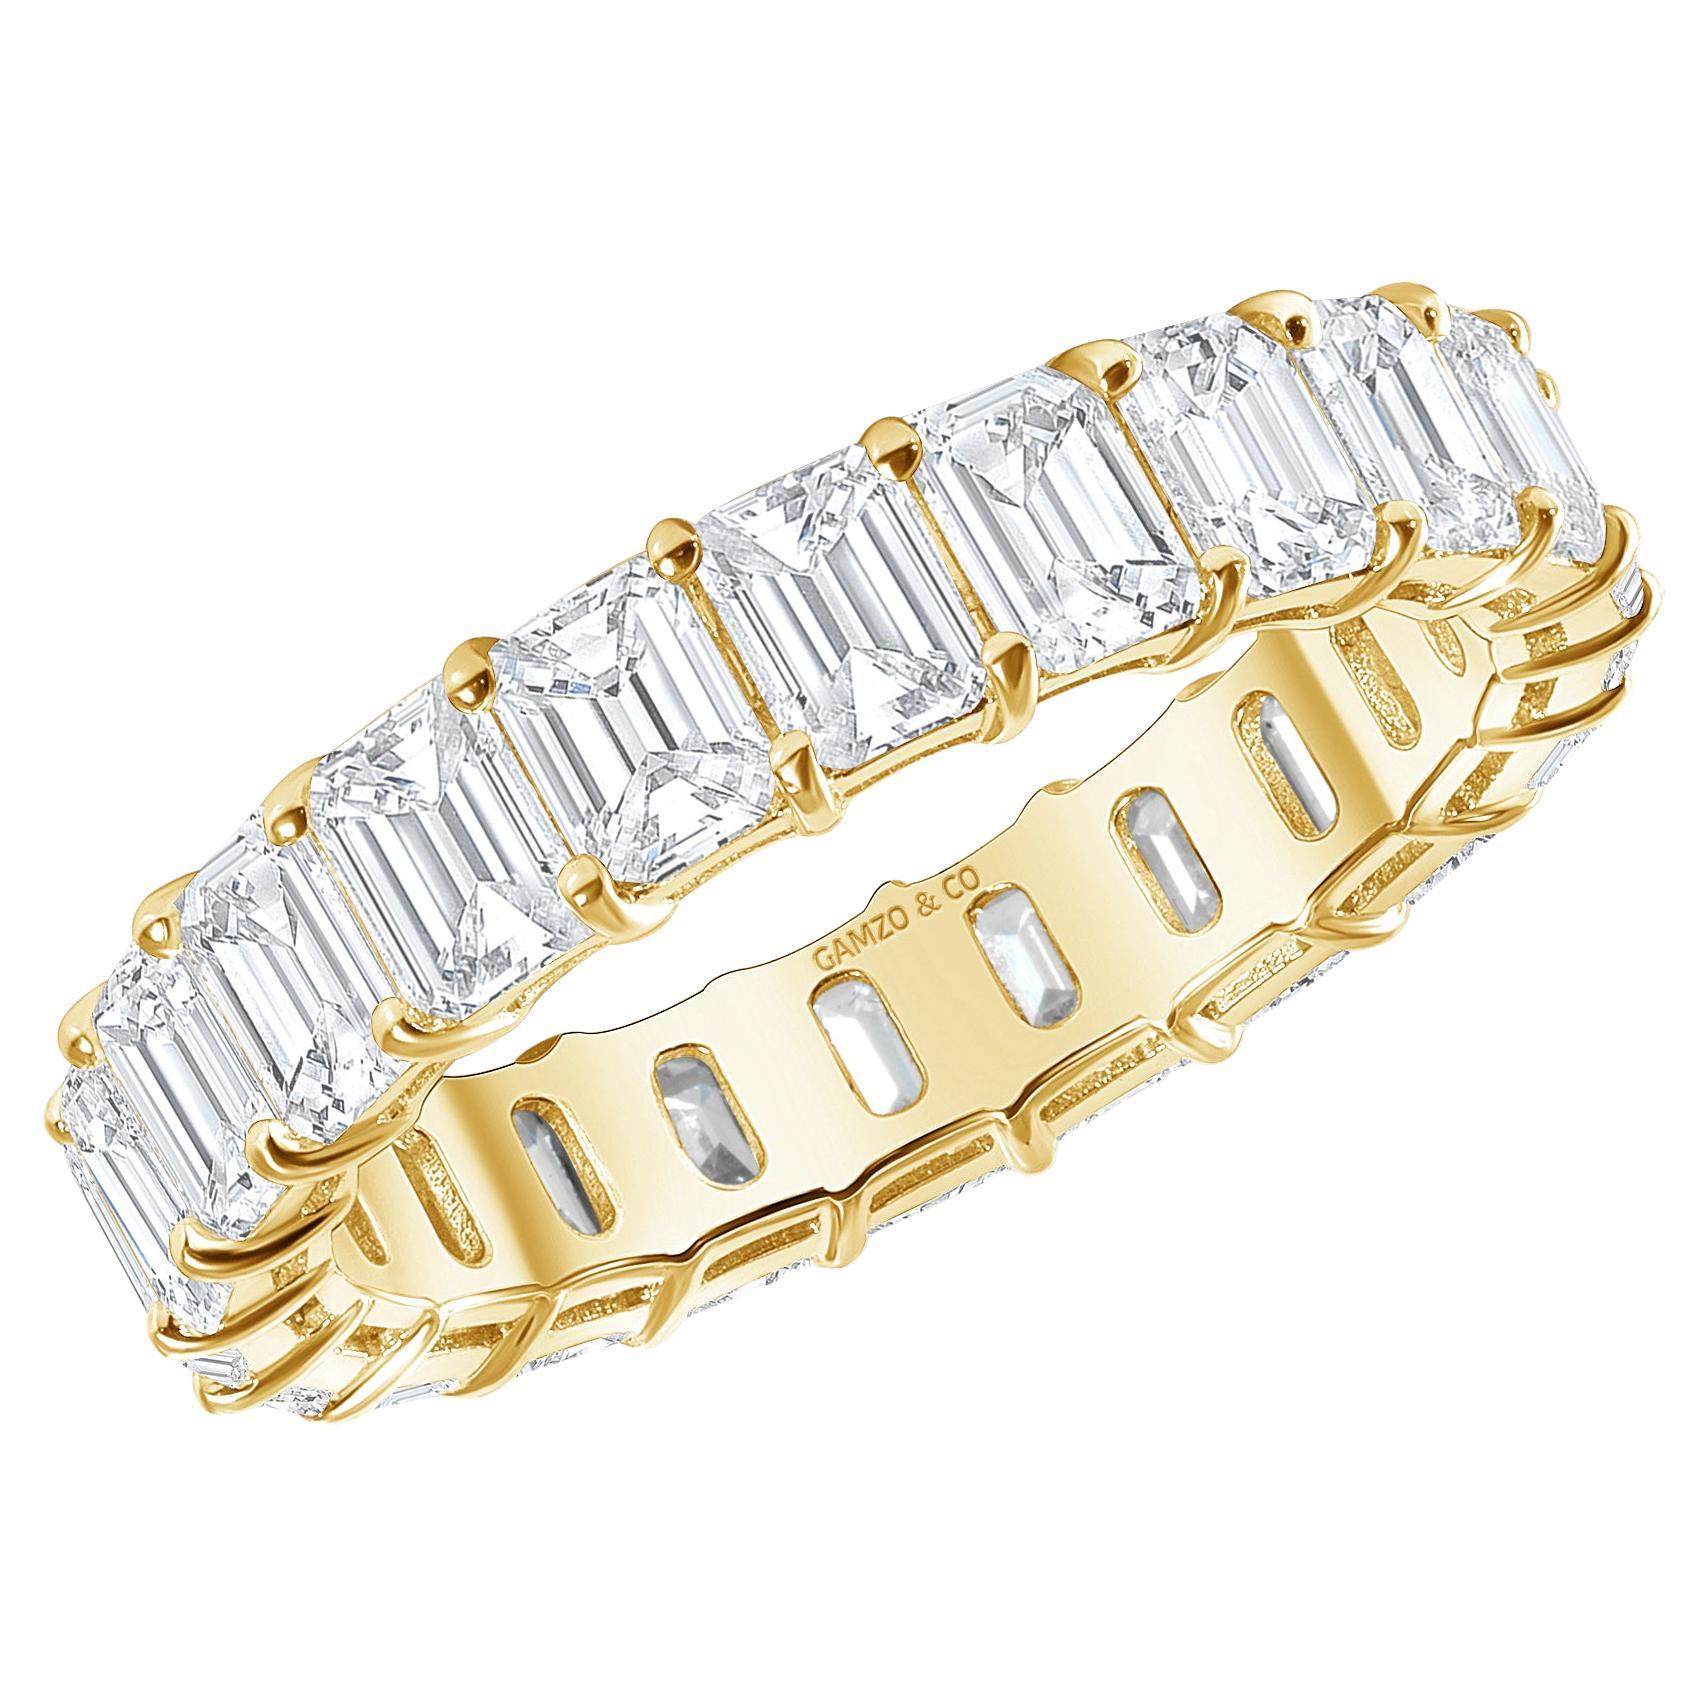 For Sale:  18k Yellow Gold 4 Carat Emerald Cut Natural Diamond Eternity Ring